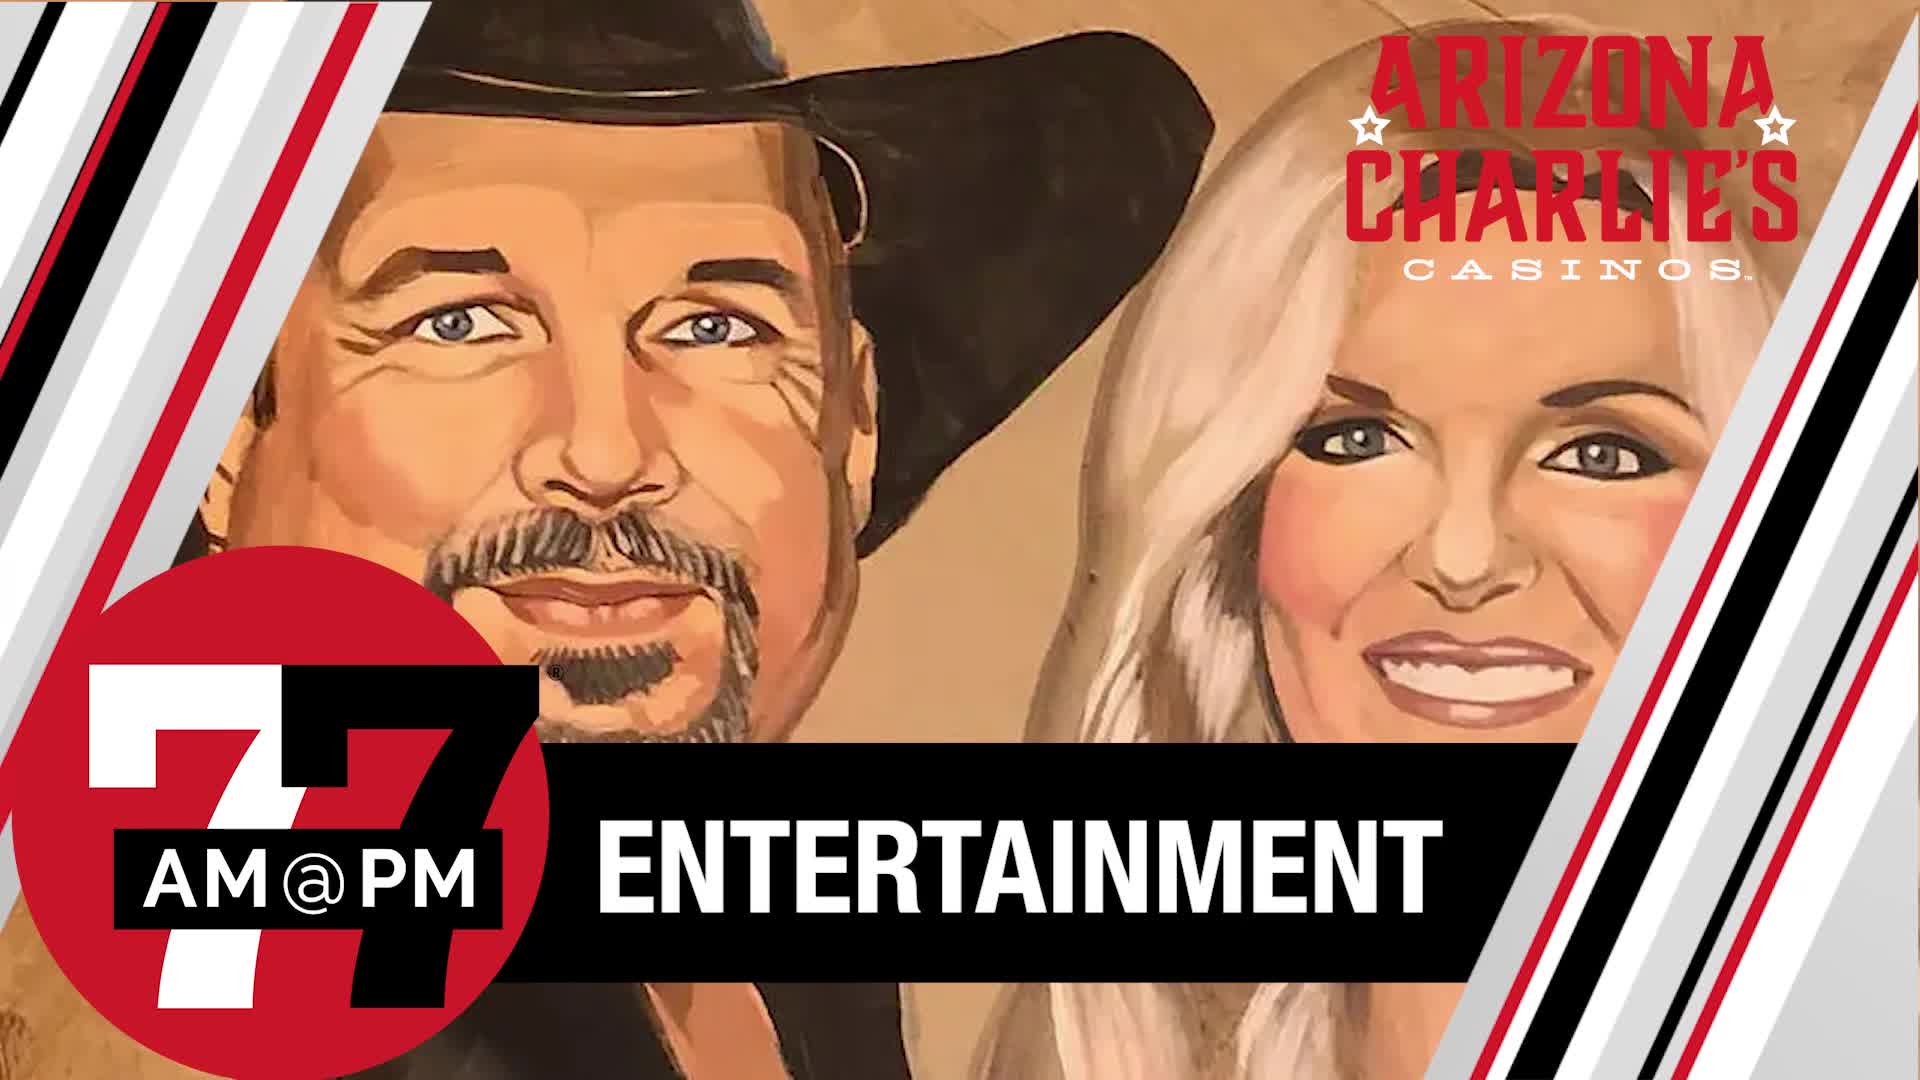 Garth Brooks added to famous wall of caricatures